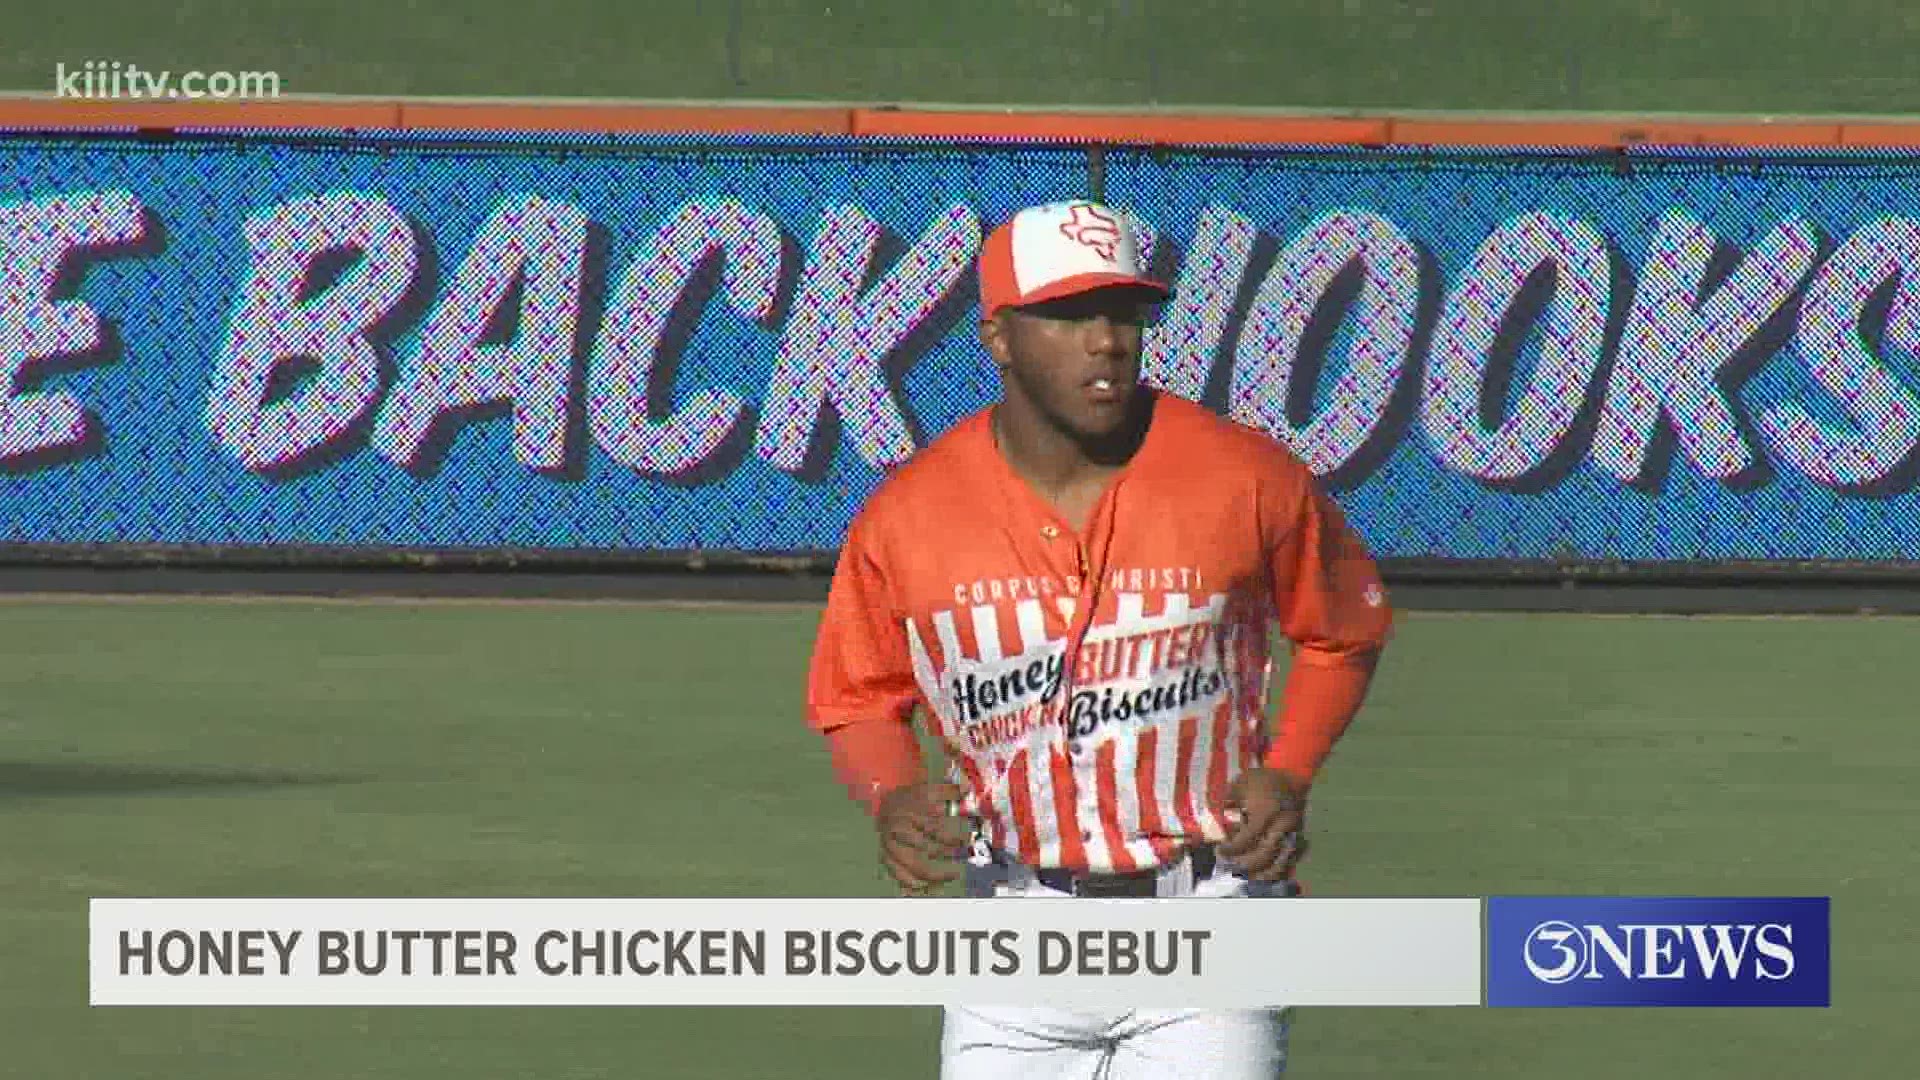 The Hooks debuted their new alternate Whataburger-themed uniforms Wednesday and got their first win of the season, 4-2 over San Antonio.